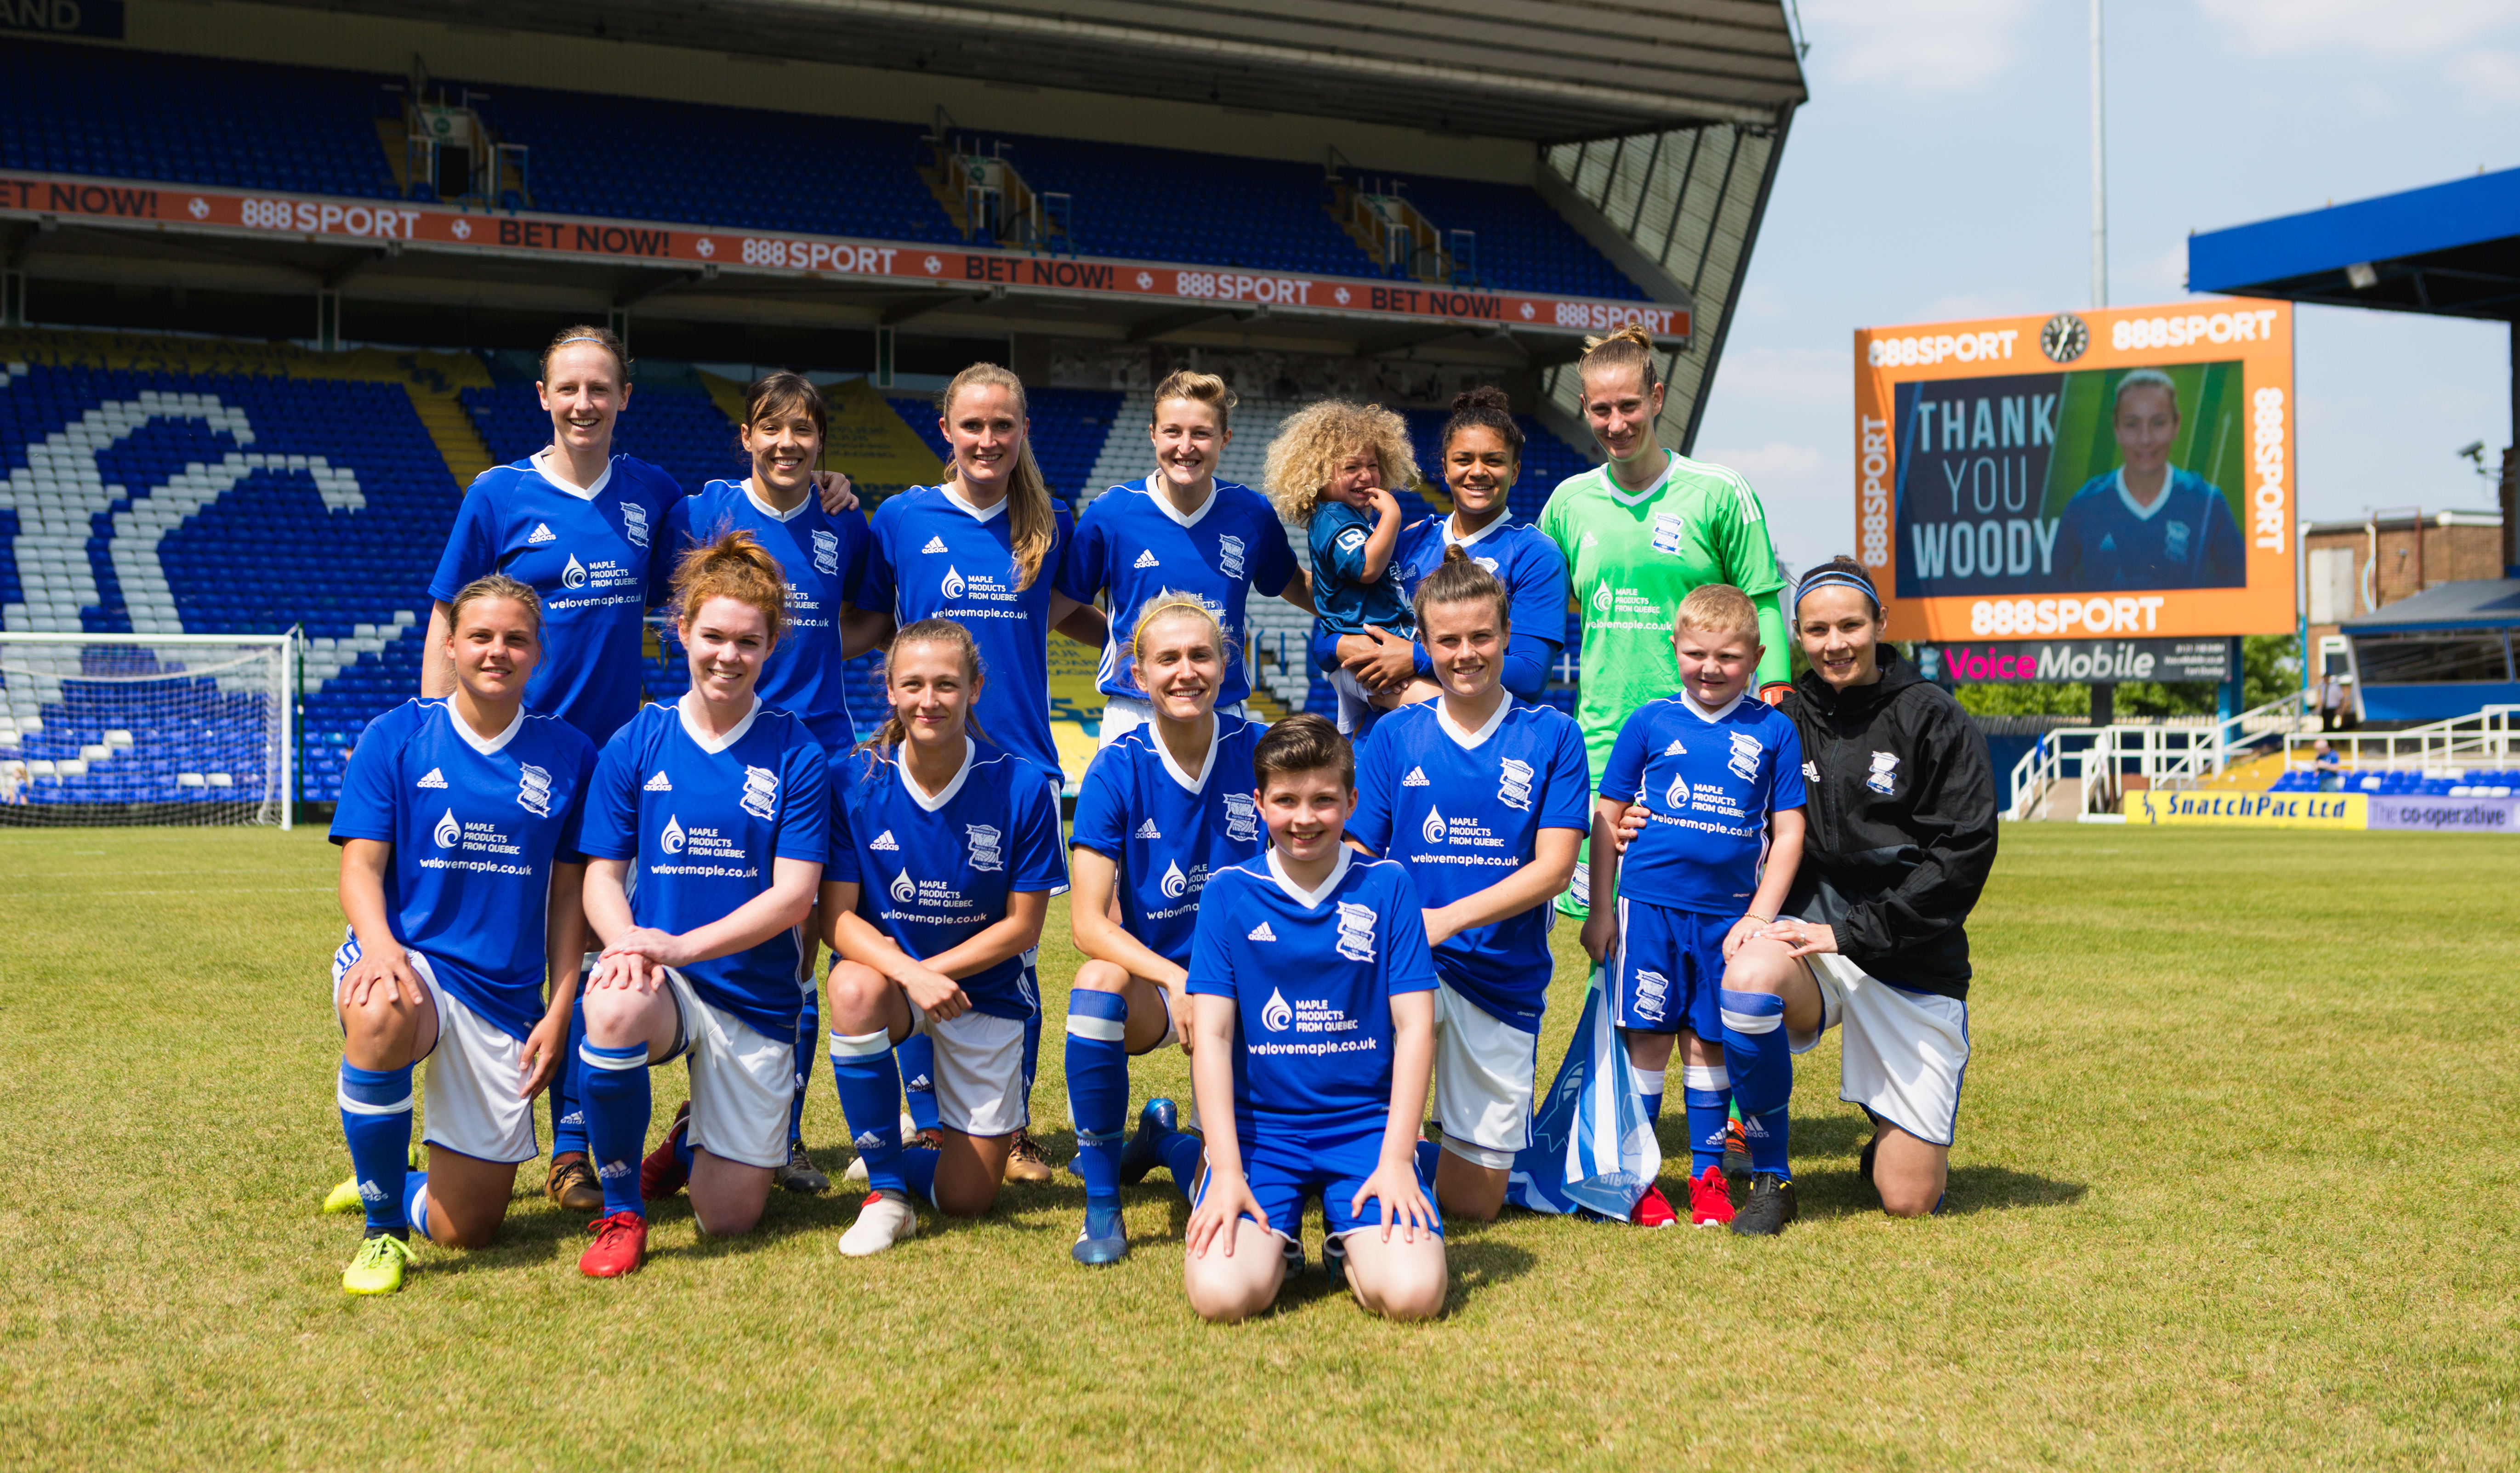 competition winner, Millie Jenkins-Caley, with Birmingham City Ladies FC players